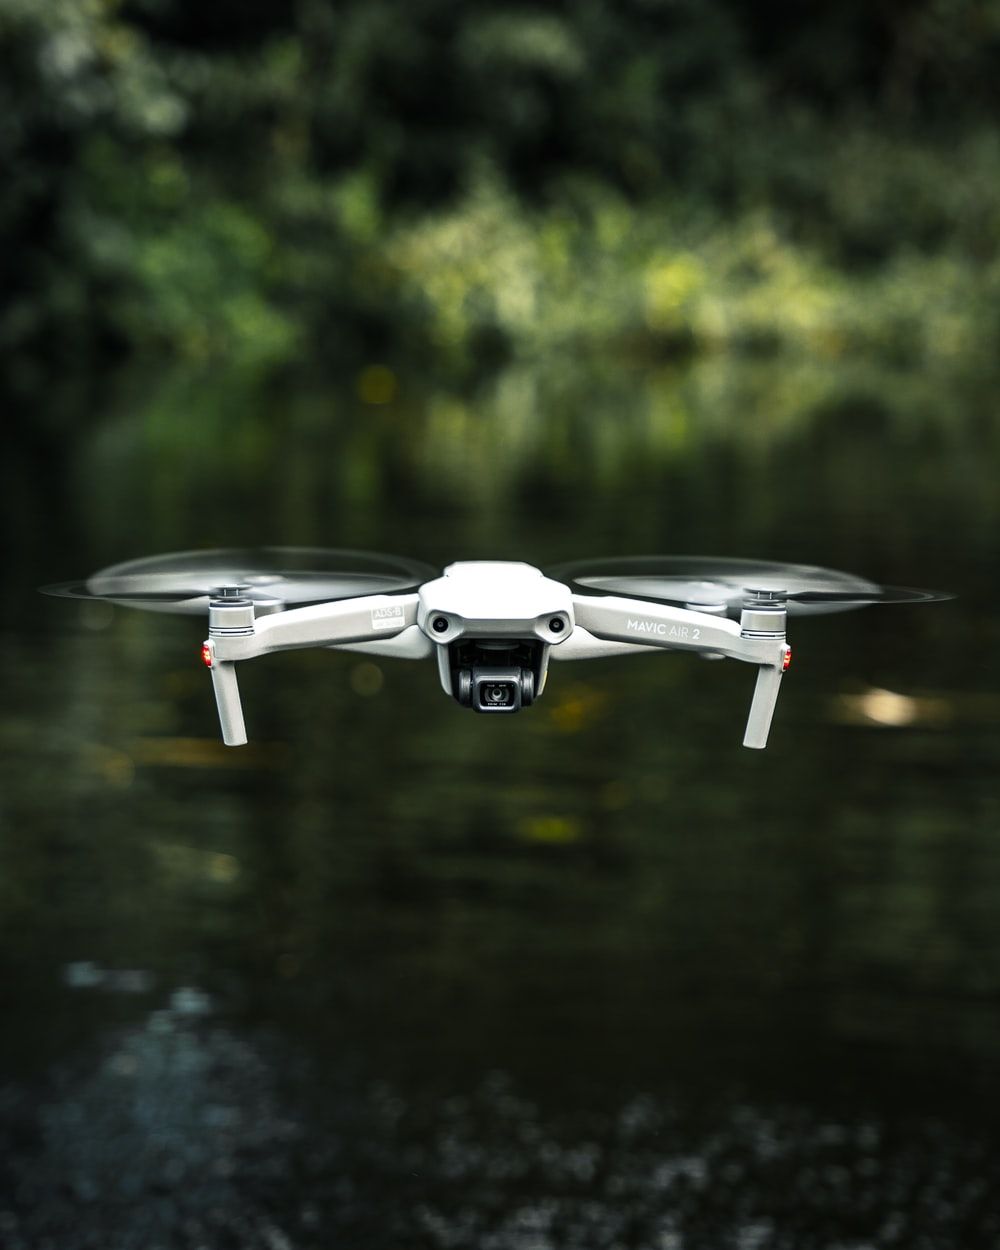 Mavic Air 2 Picture. Download Free Image